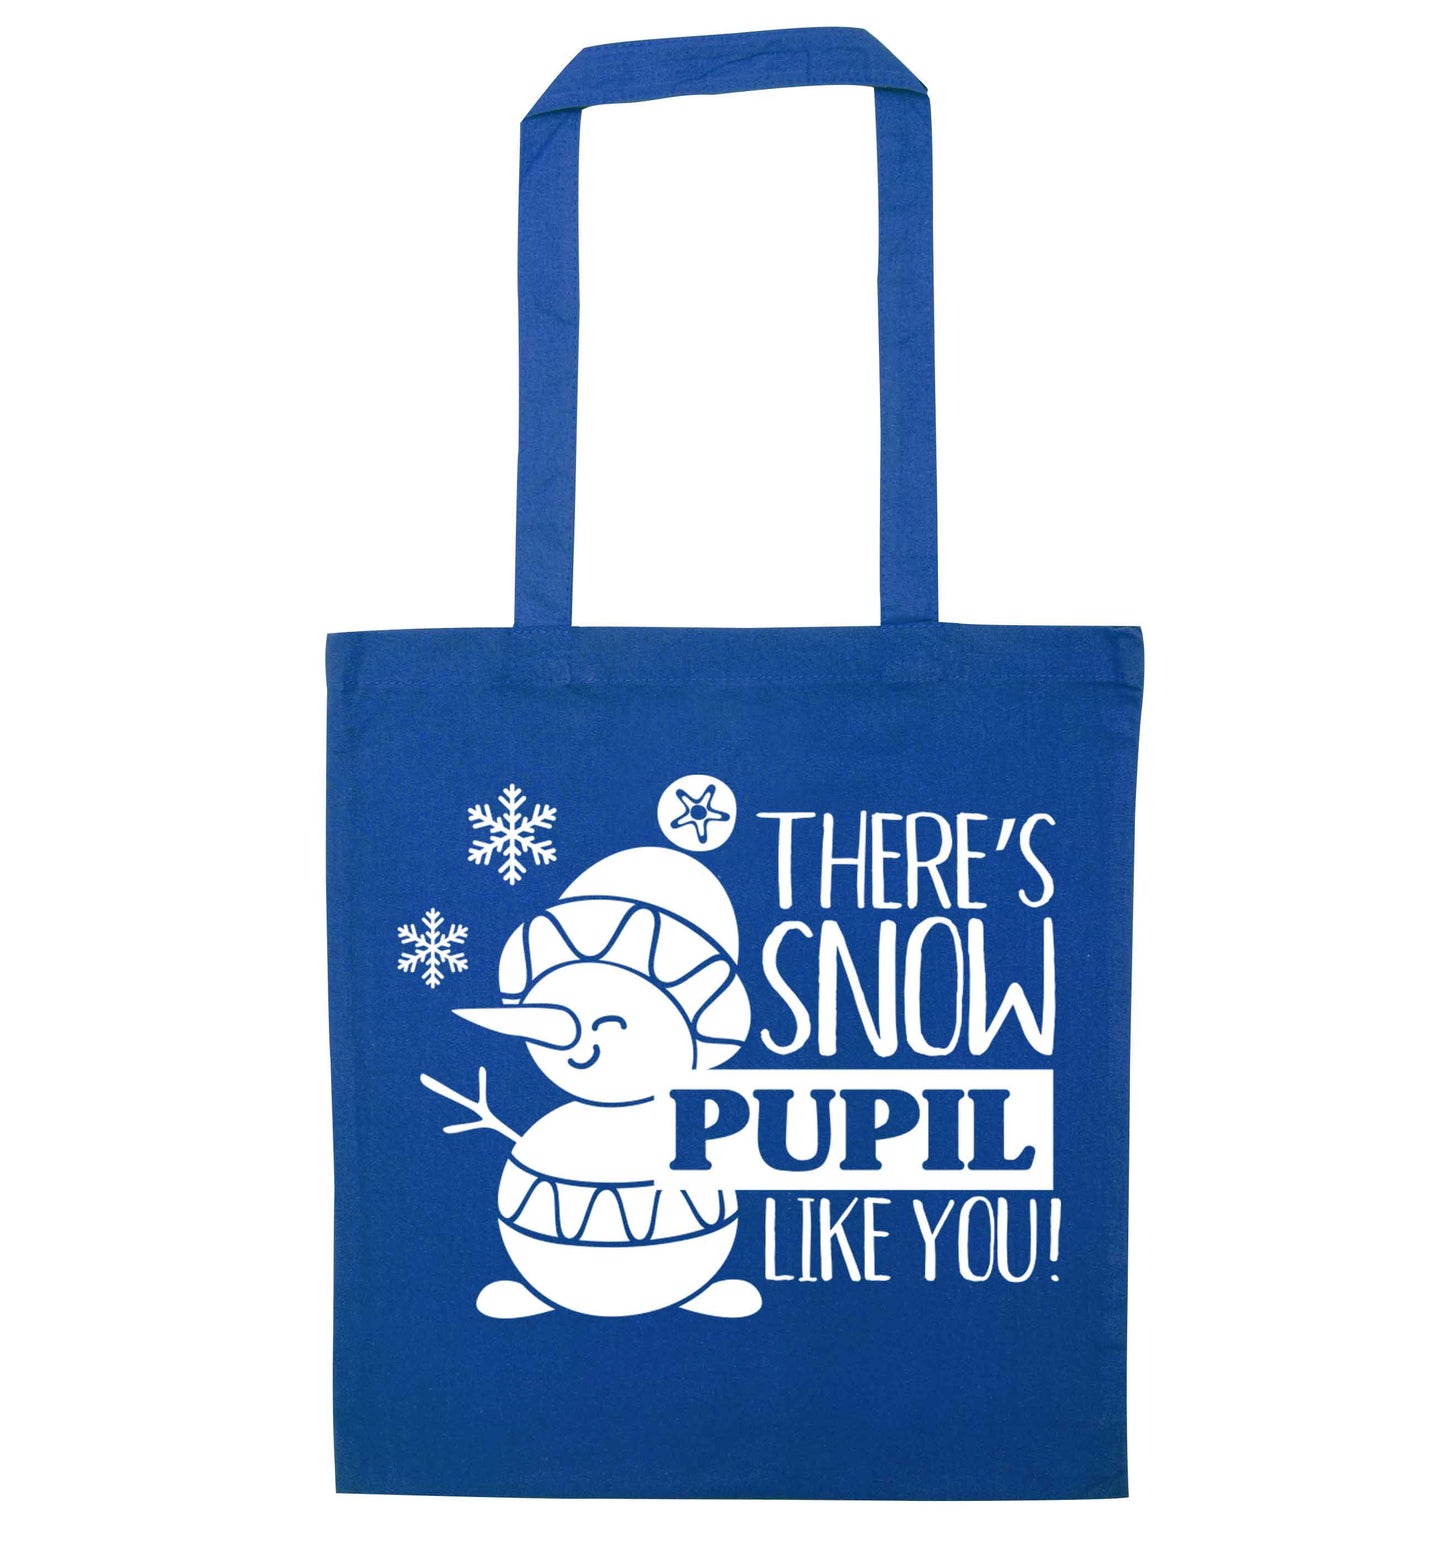 There's snow pupil like you blue tote bag